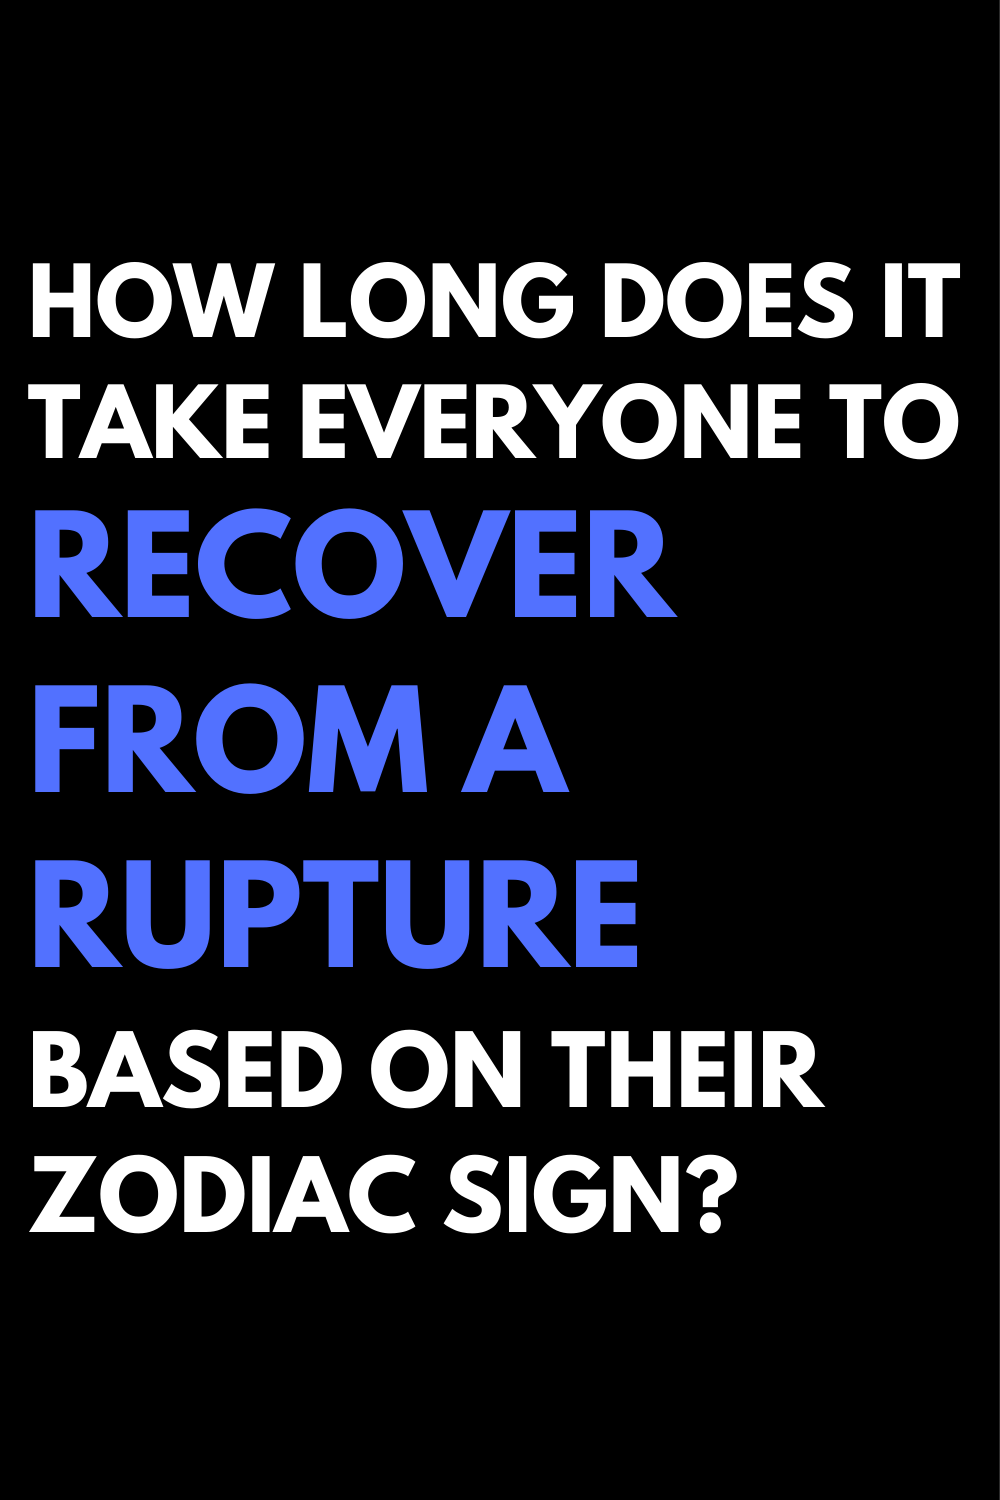 How Long Does It Take Everyone To Recover From A Rupture Based On Their Zodiac Sign?